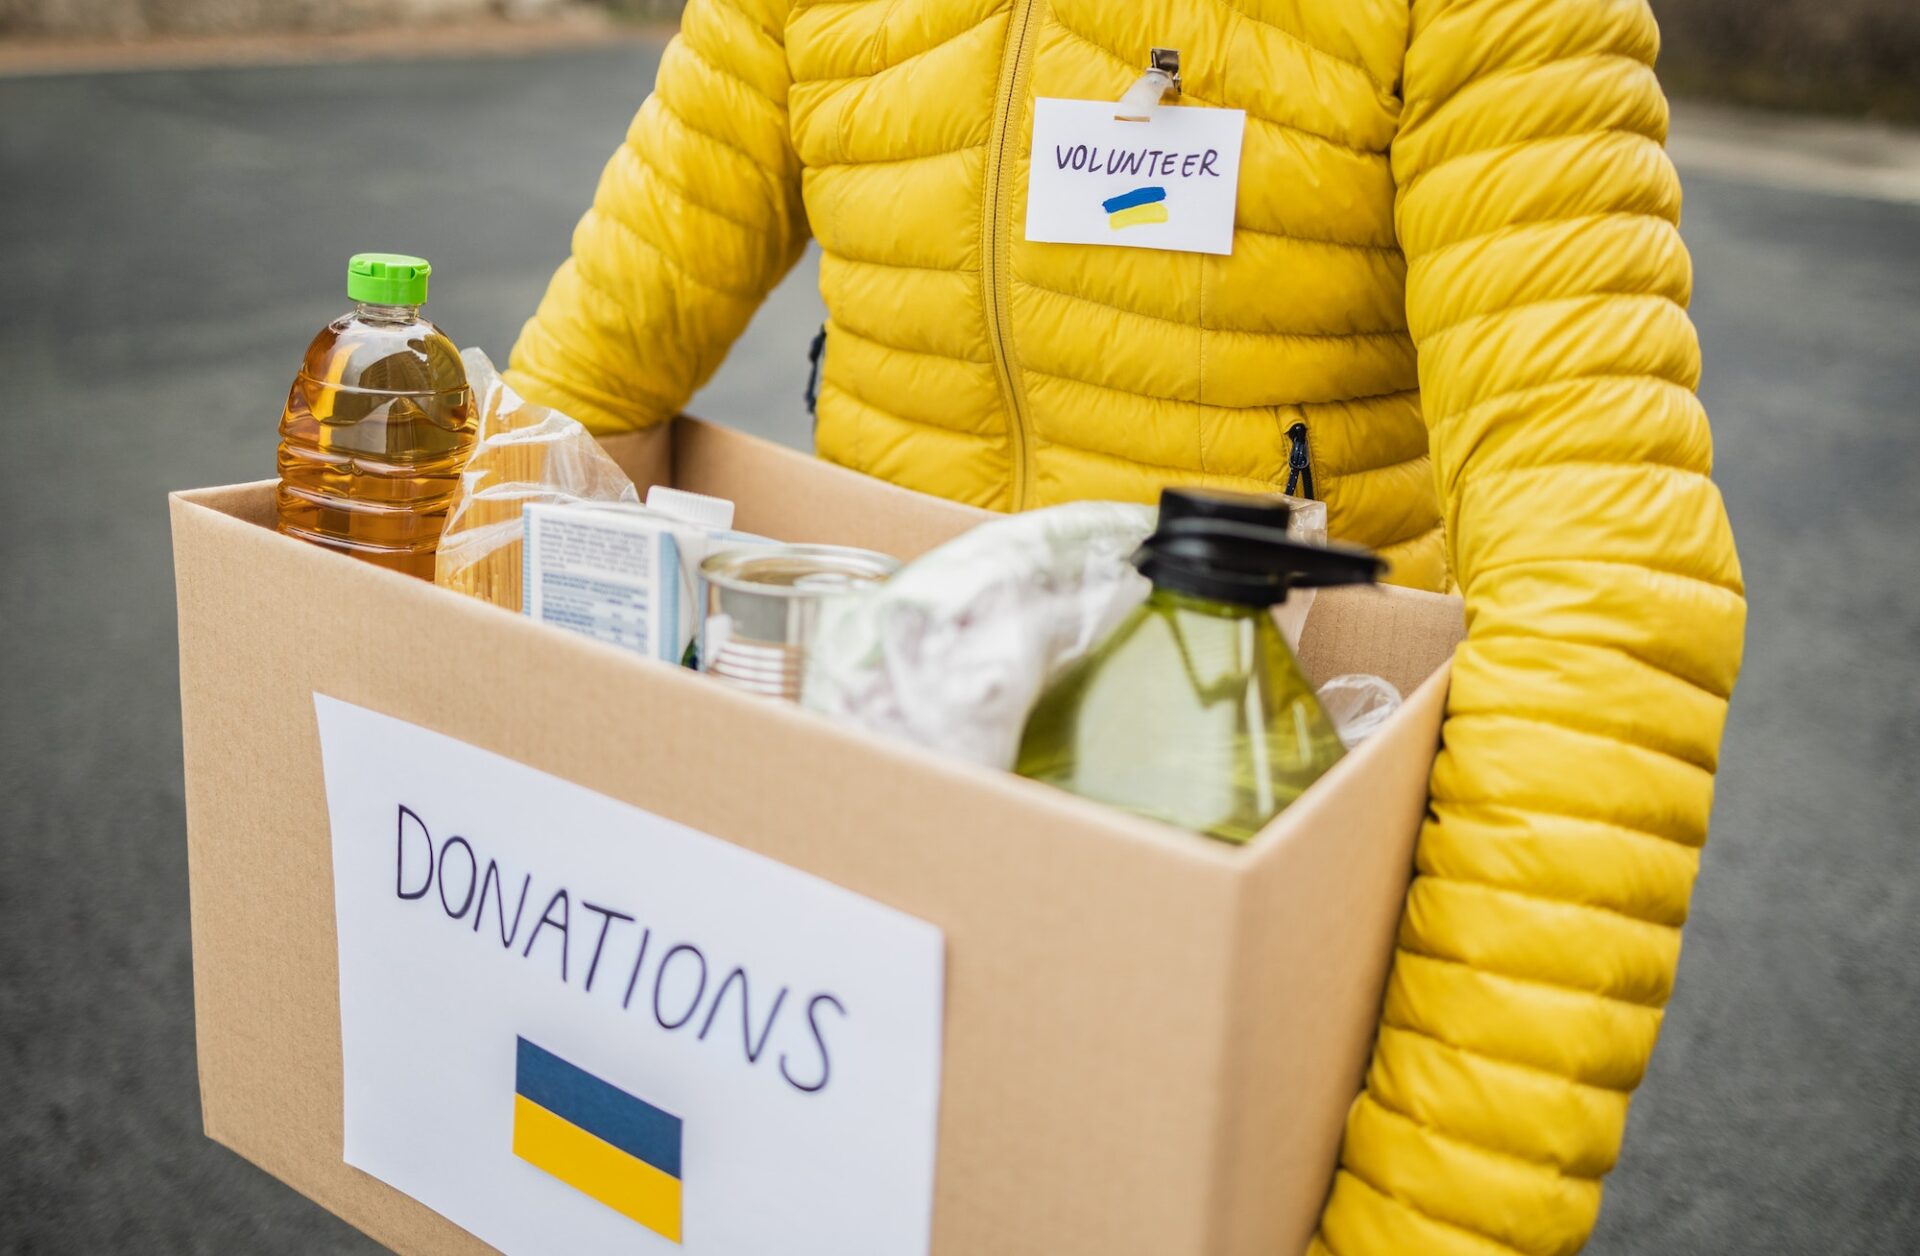 Volunteer collecting box with donations for Ukrainian refugees - Humanitarian aid for Ukraine